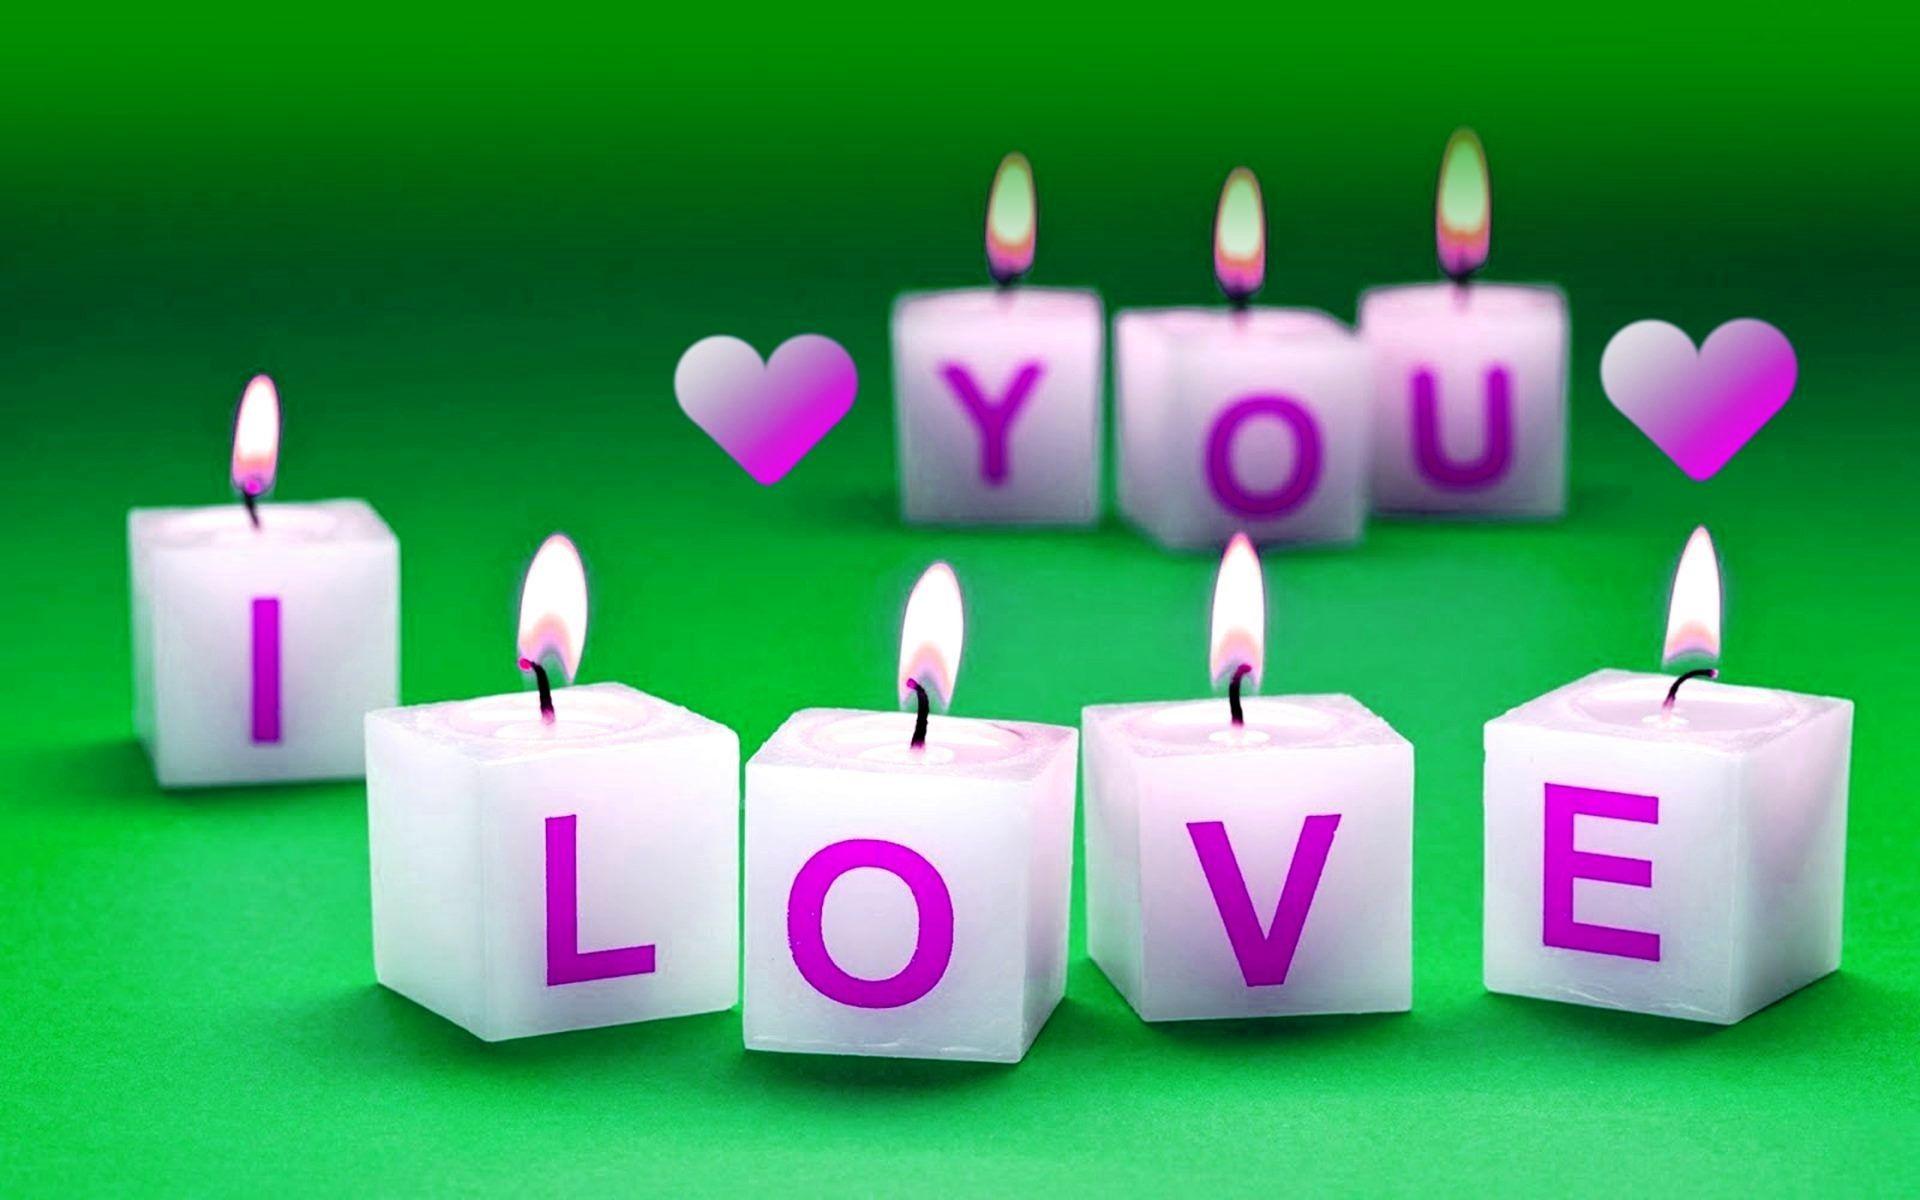 Wallpaper.wiki I Love You Candle Light Best Love Wallpaper PIC